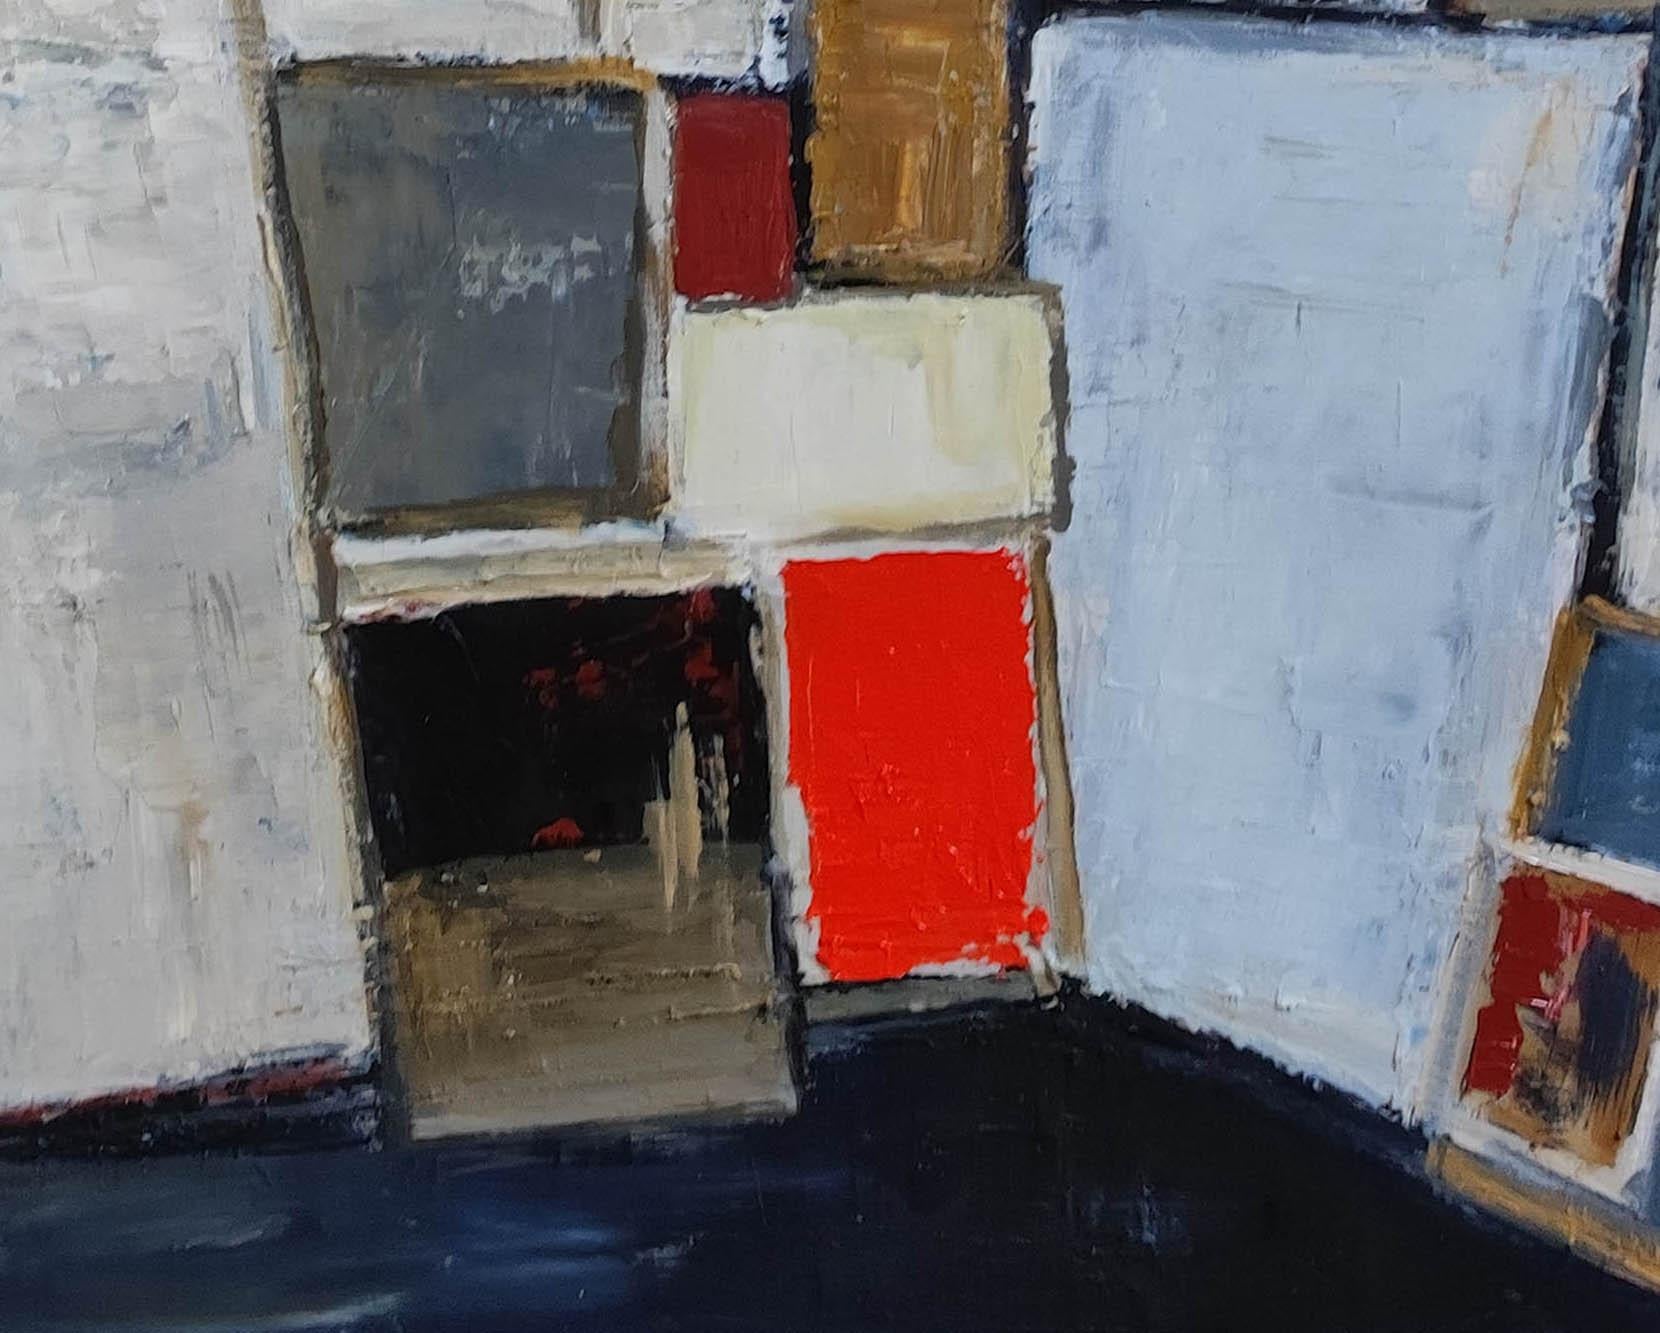 Sophie DUMONT's abstract is not a concept, it is an approach where each canvas is built around graphics put into perspective by color.

Geometric abstraction of an artist's studio in shades of grey, red and black with a very important texture and